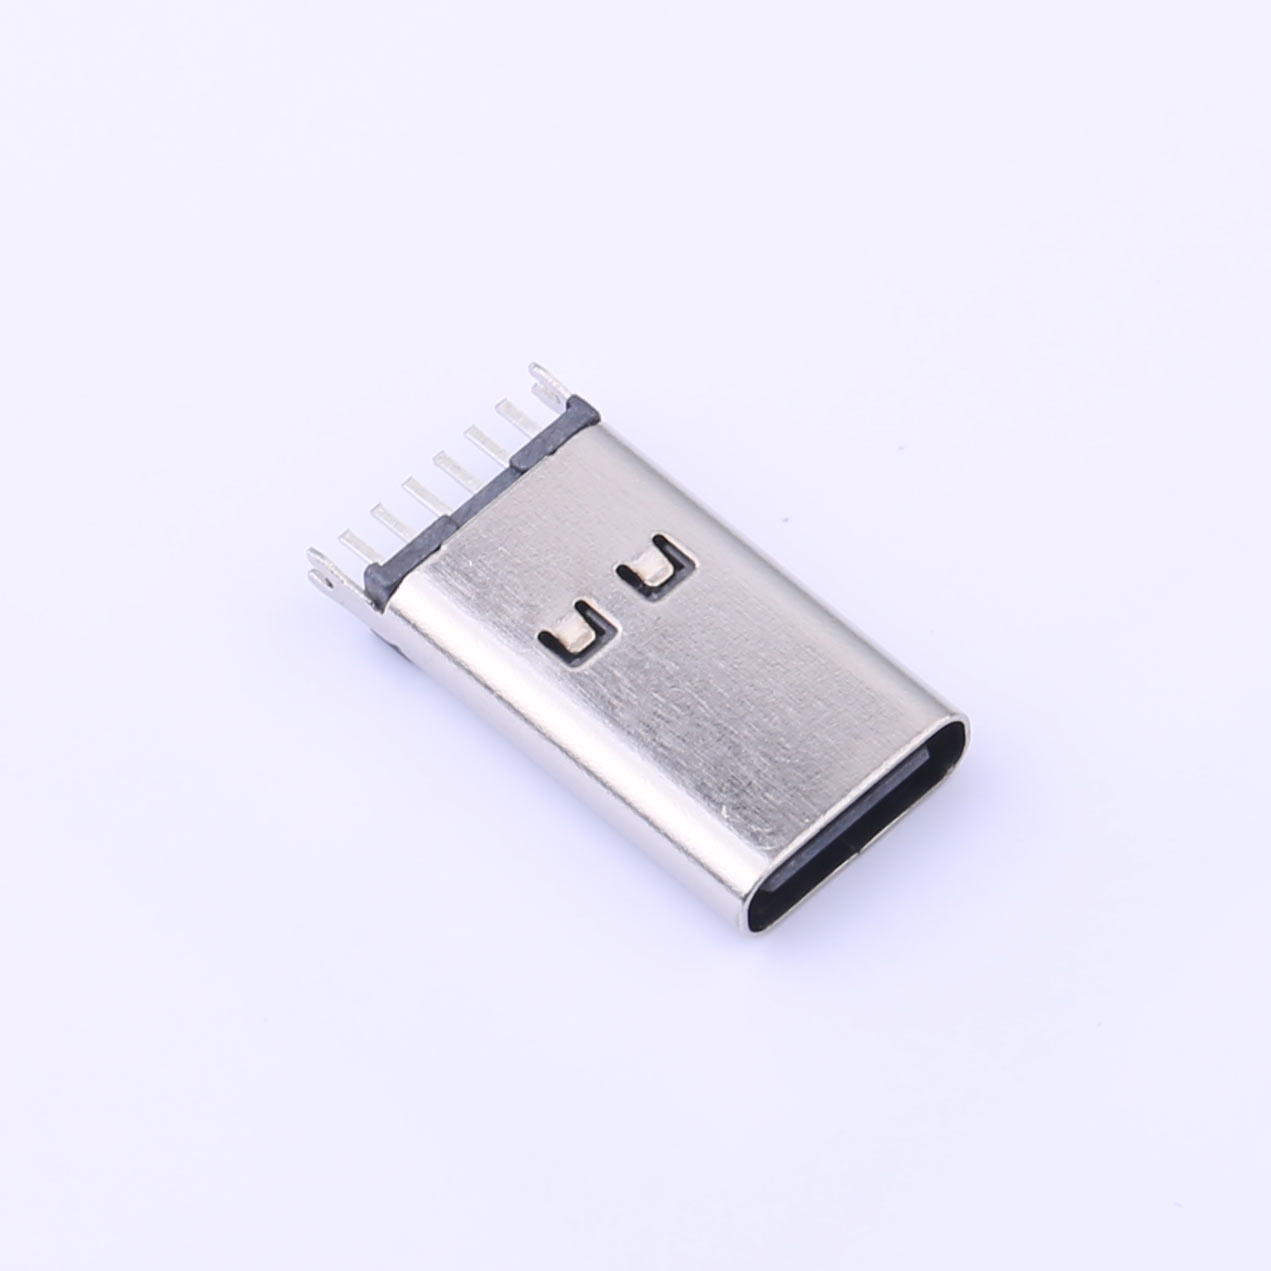 Kinghelm USB Type-C Connector socket is directly inserted - KH-type-c-l15-6p